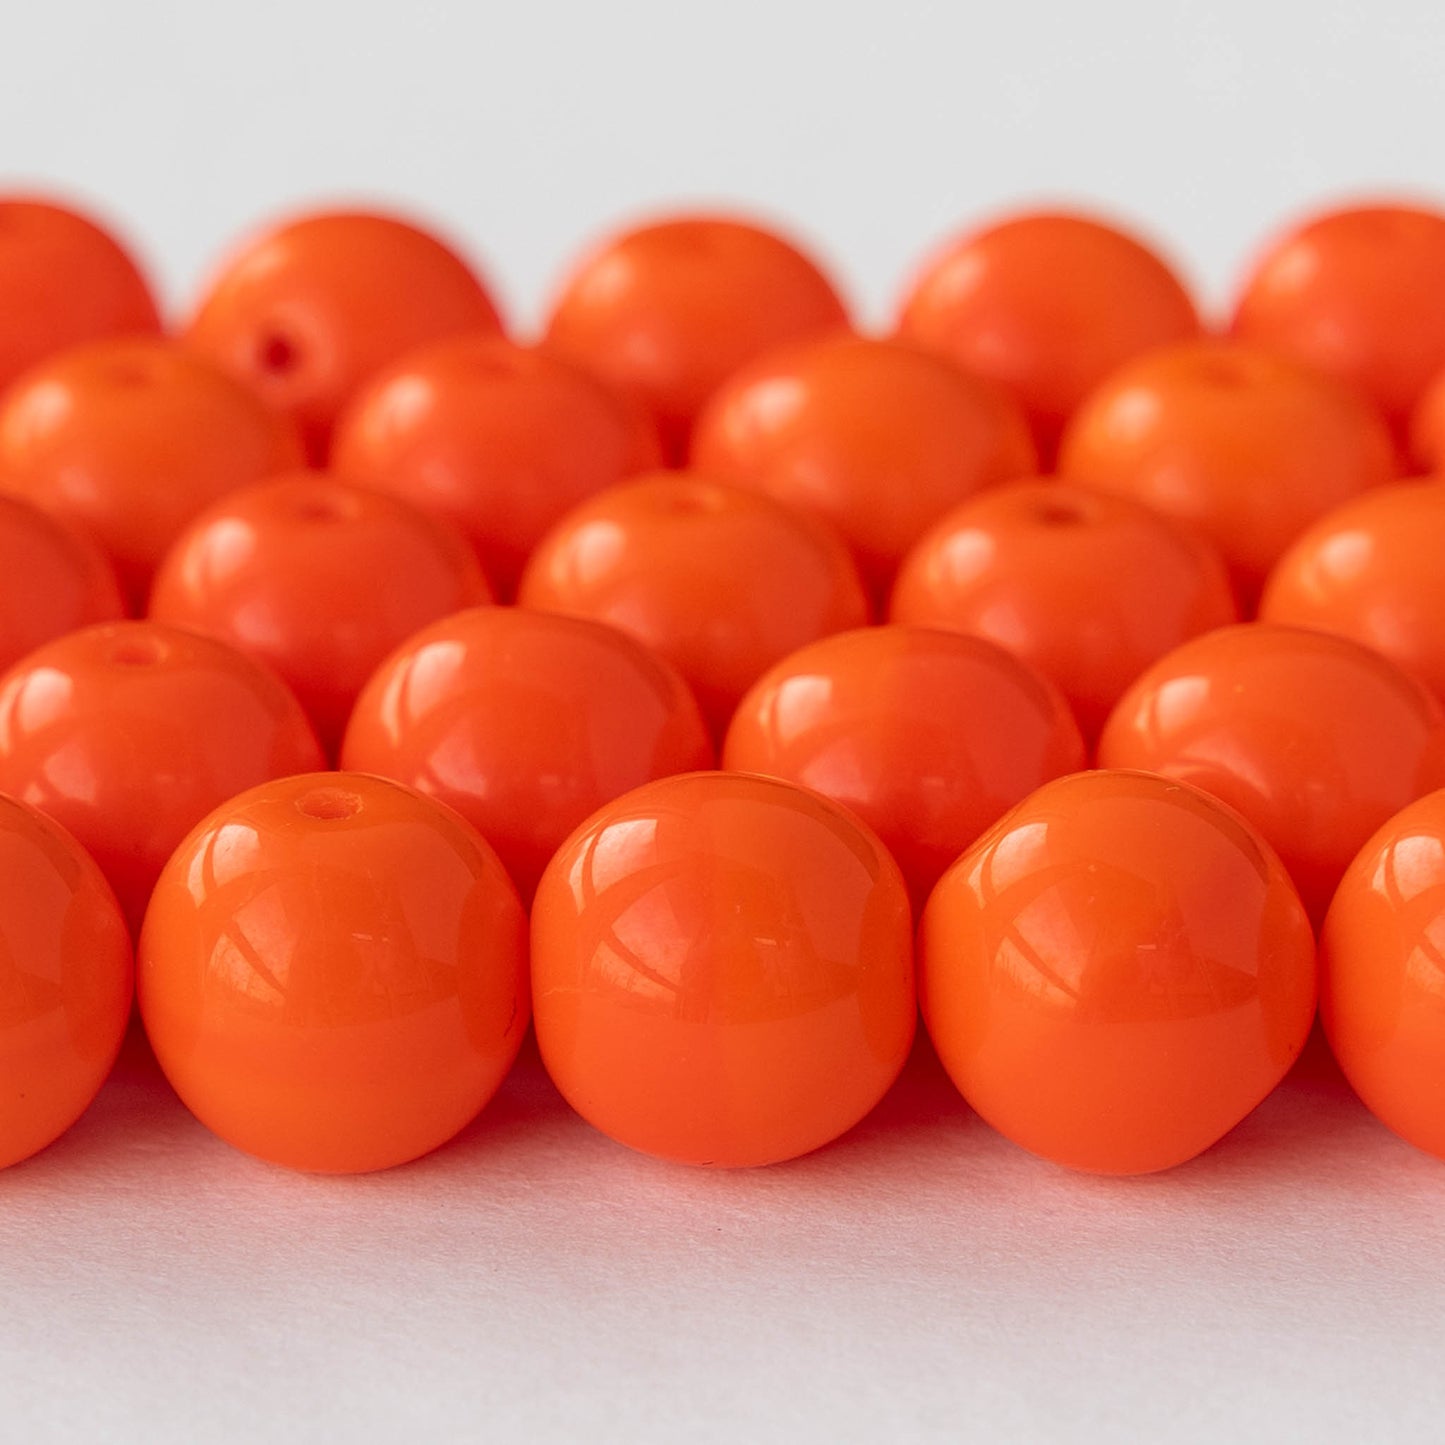 10mm Round Opaques - Orange - 20 or 60